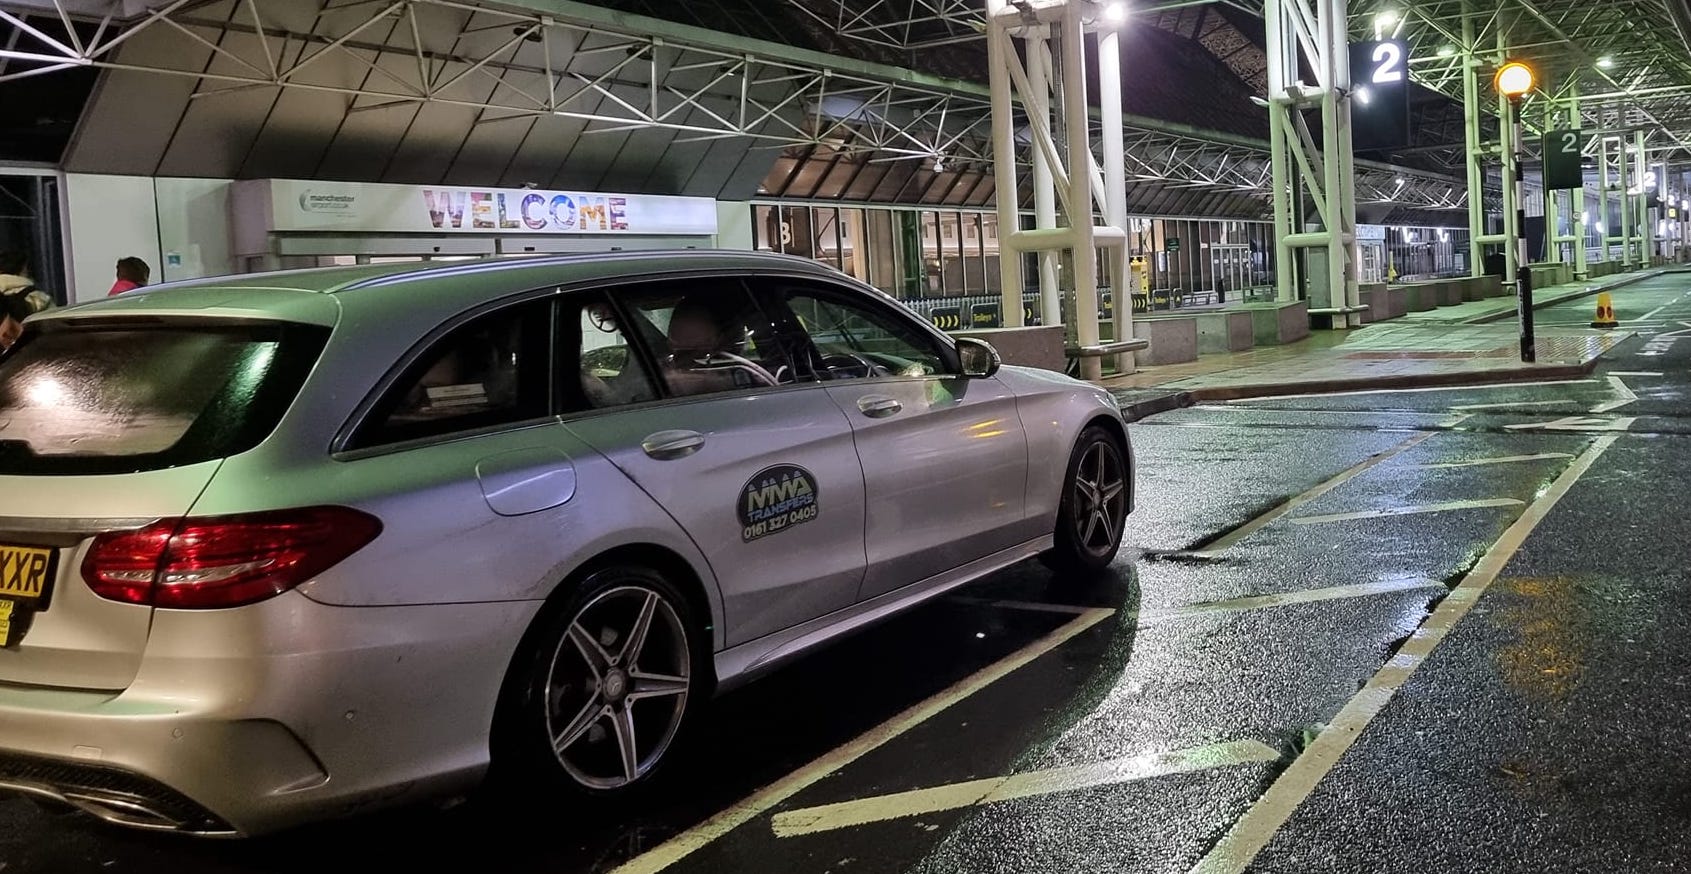 Take a Taxi from Manchester Airport to Bradford with a free Meet and Greet Service